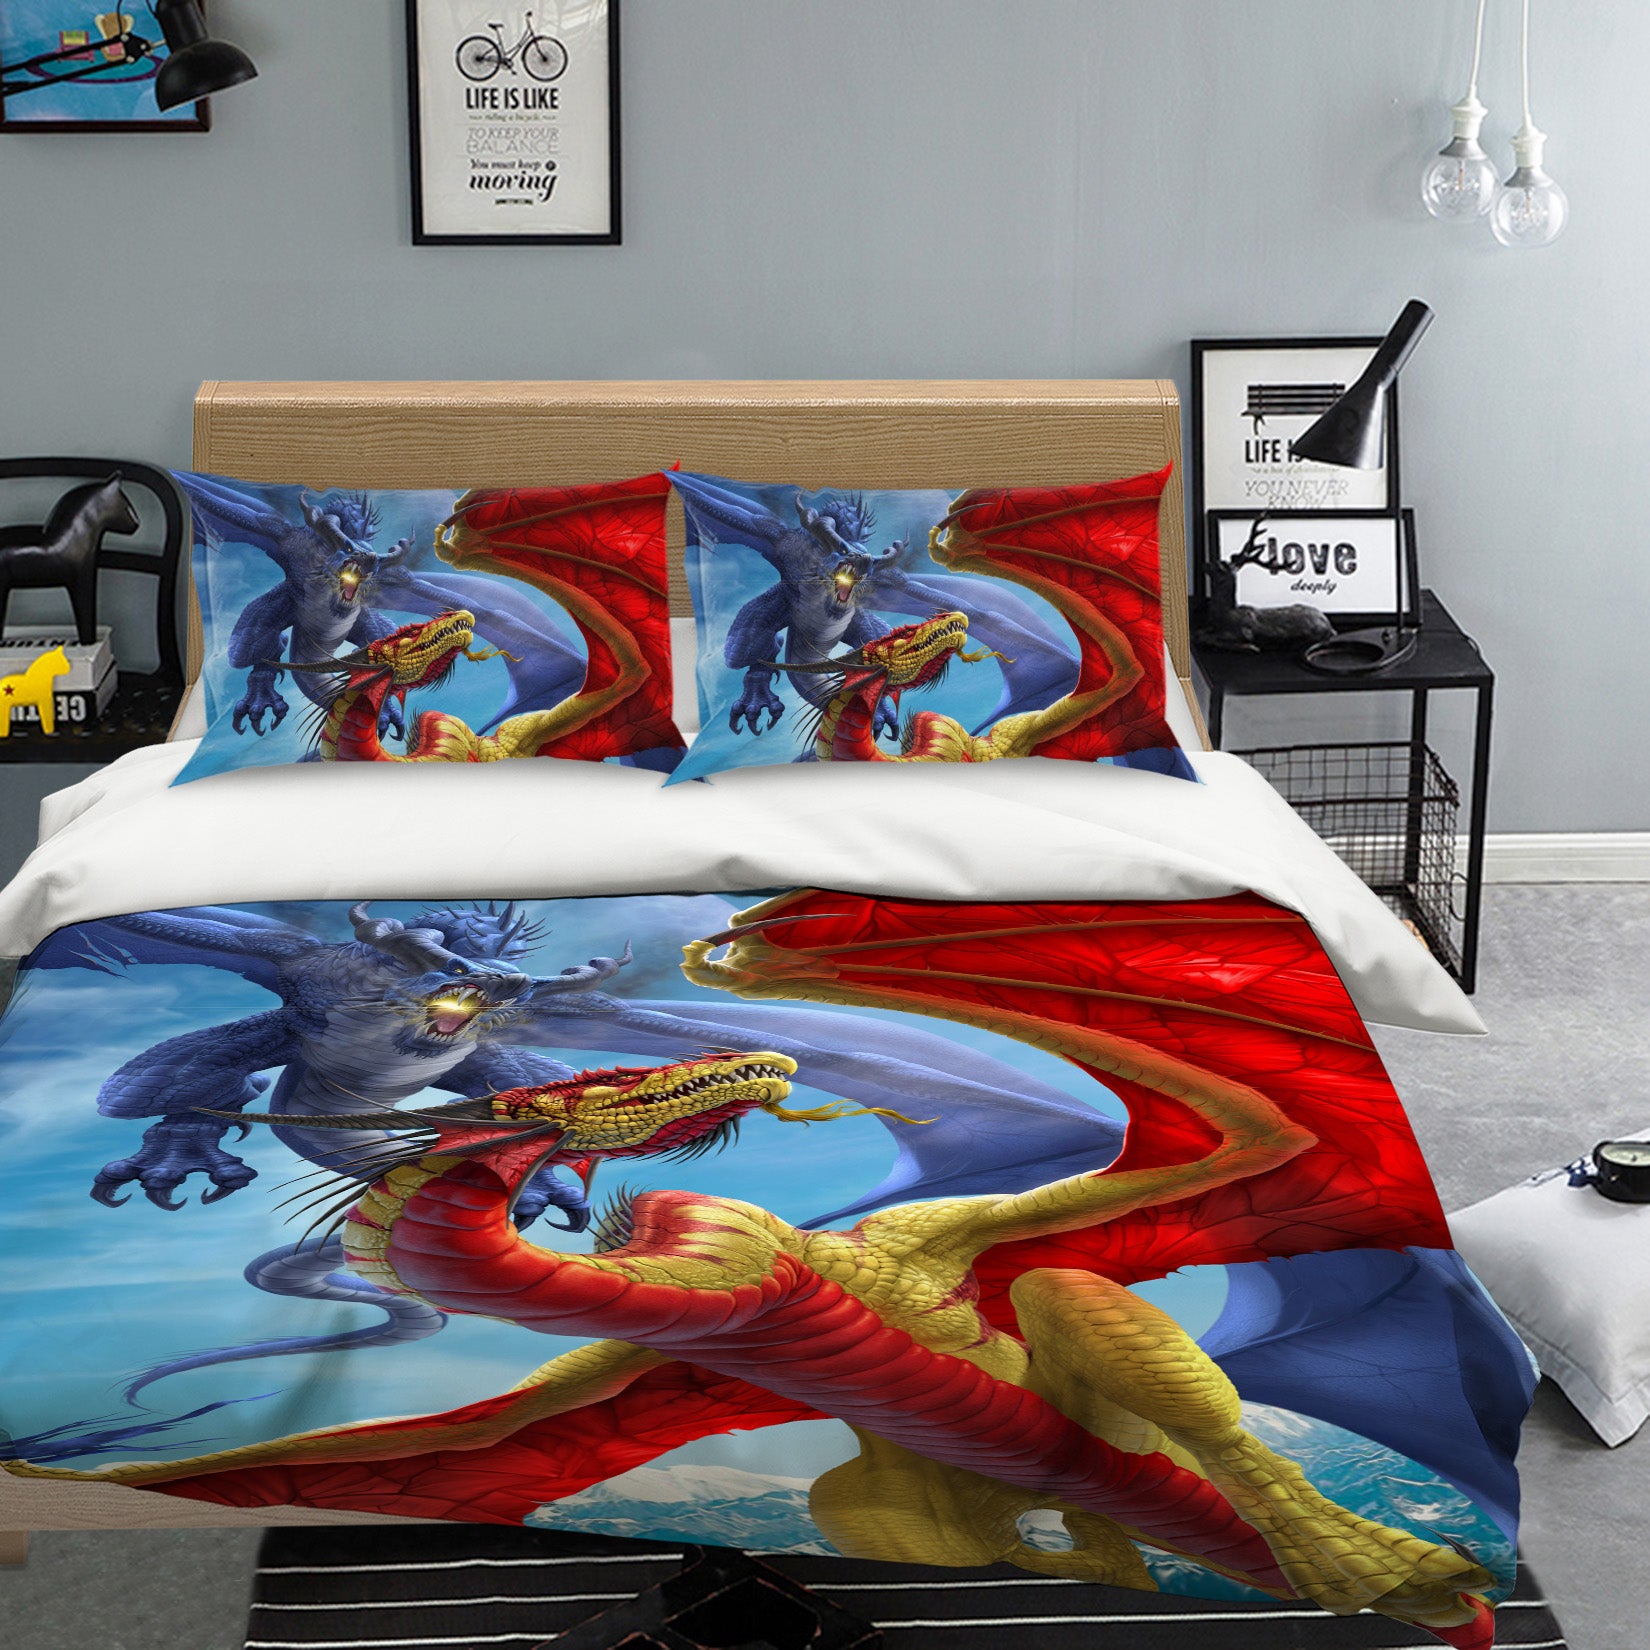 3D Winged Dragon 4096 Tom Wood Bedding Bed Pillowcases Quilt